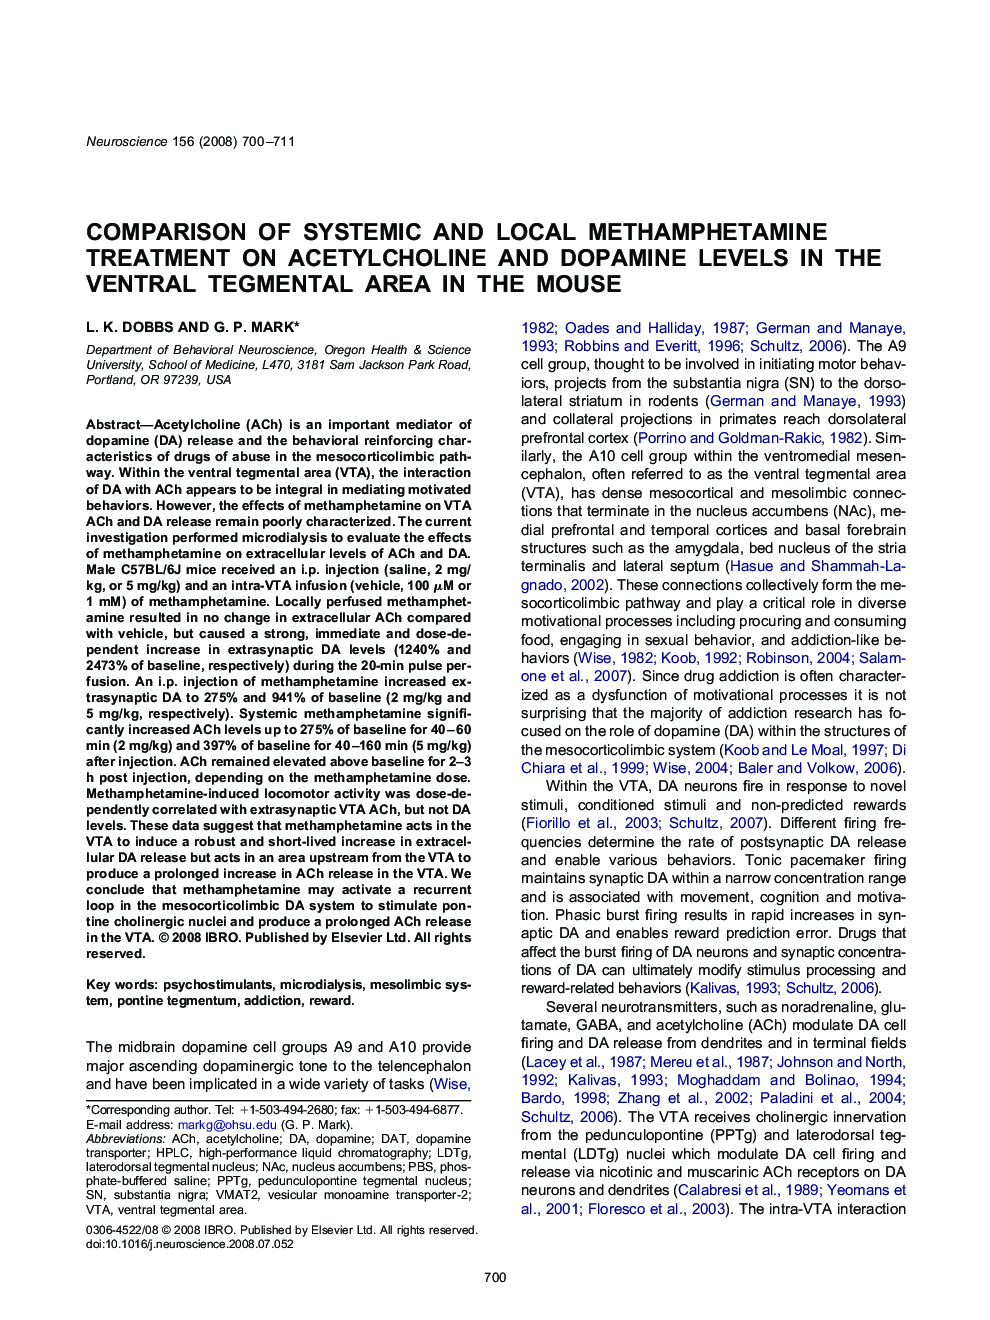 Comparison of systemic and local methamphetamine treatment on acetylcholine and dopamine levels in the ventral tegmental area in the mouse